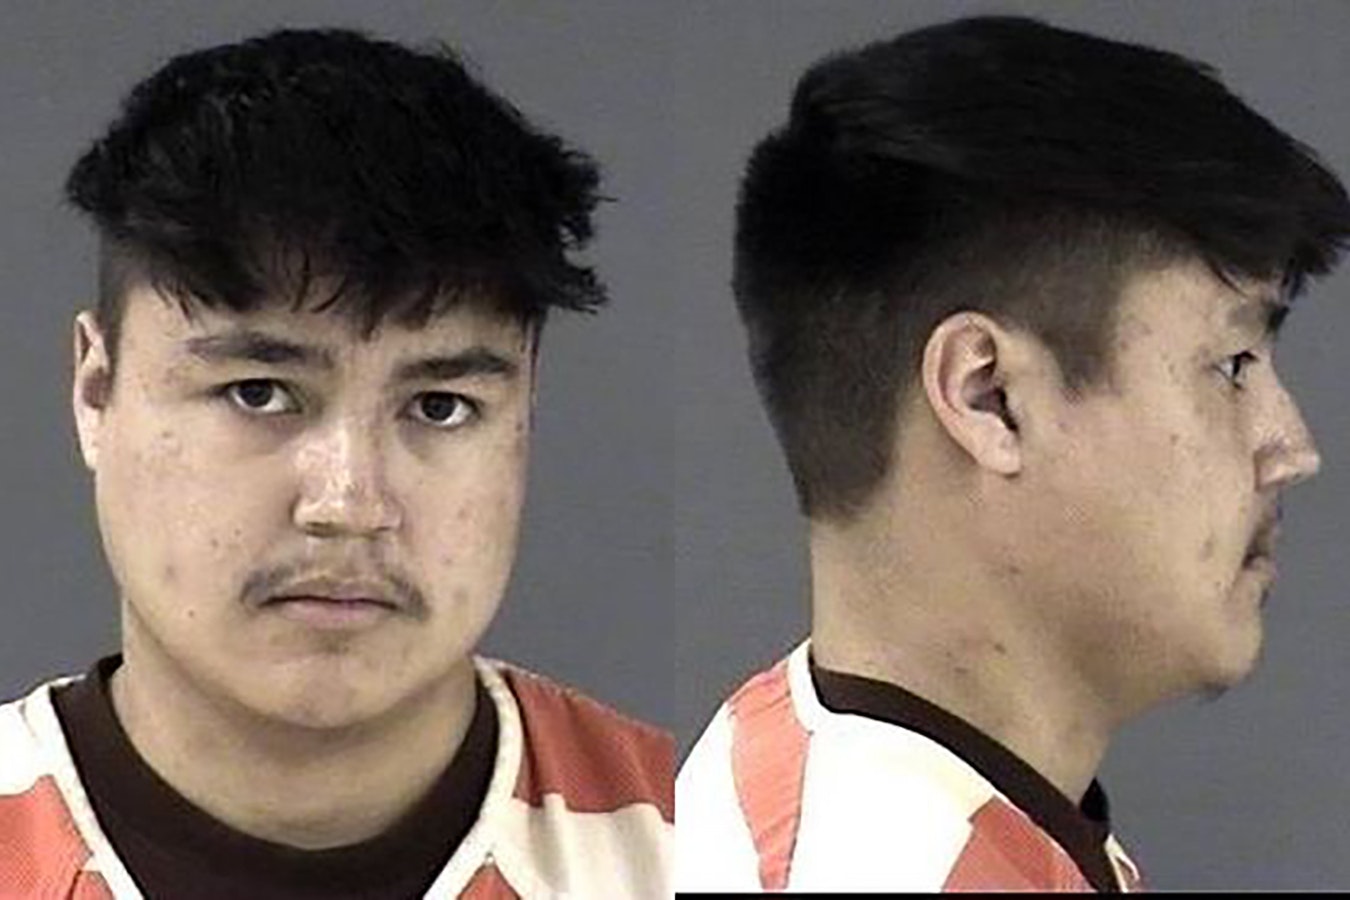 Tirso Munguia, 19, has agreed to plead guilty in the accidental shooting death of a 16-year-old Cheyenne girl in January.